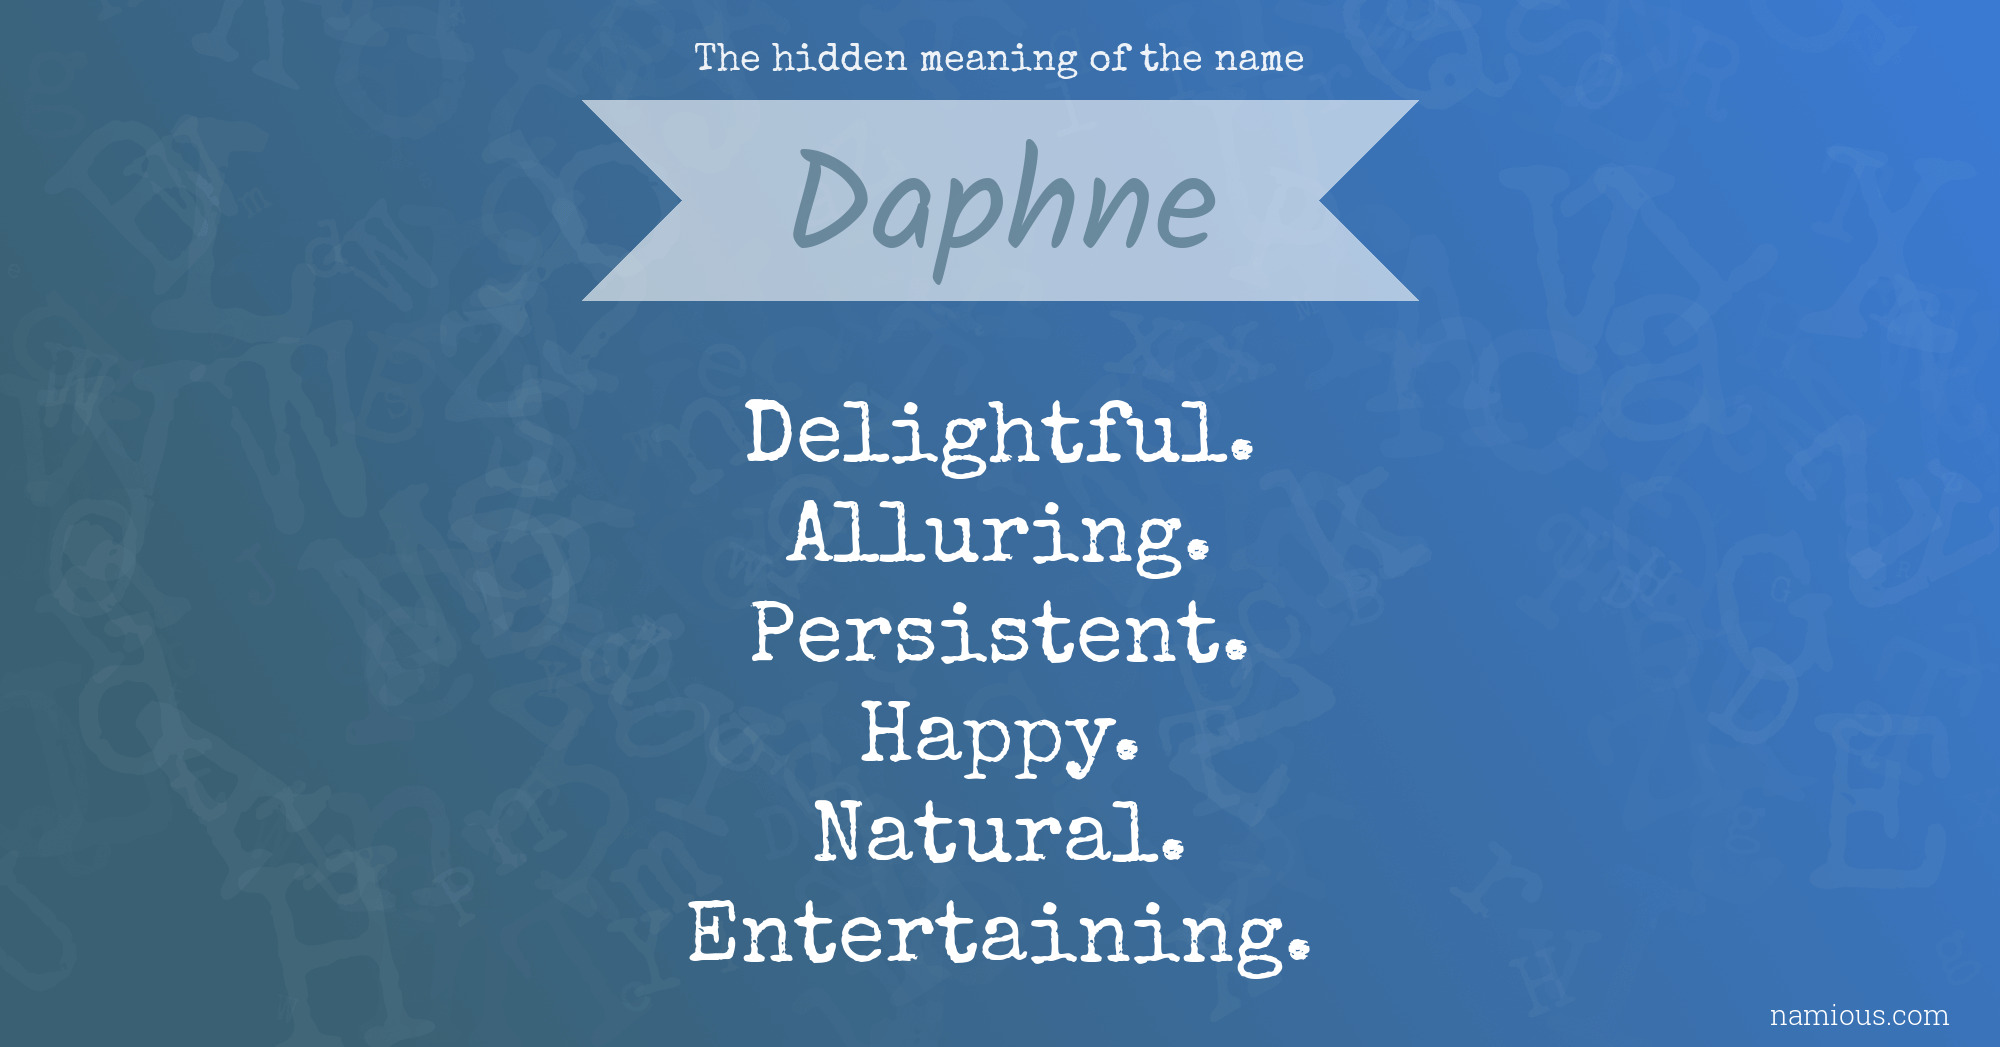 The hidden meaning of the name Daphne